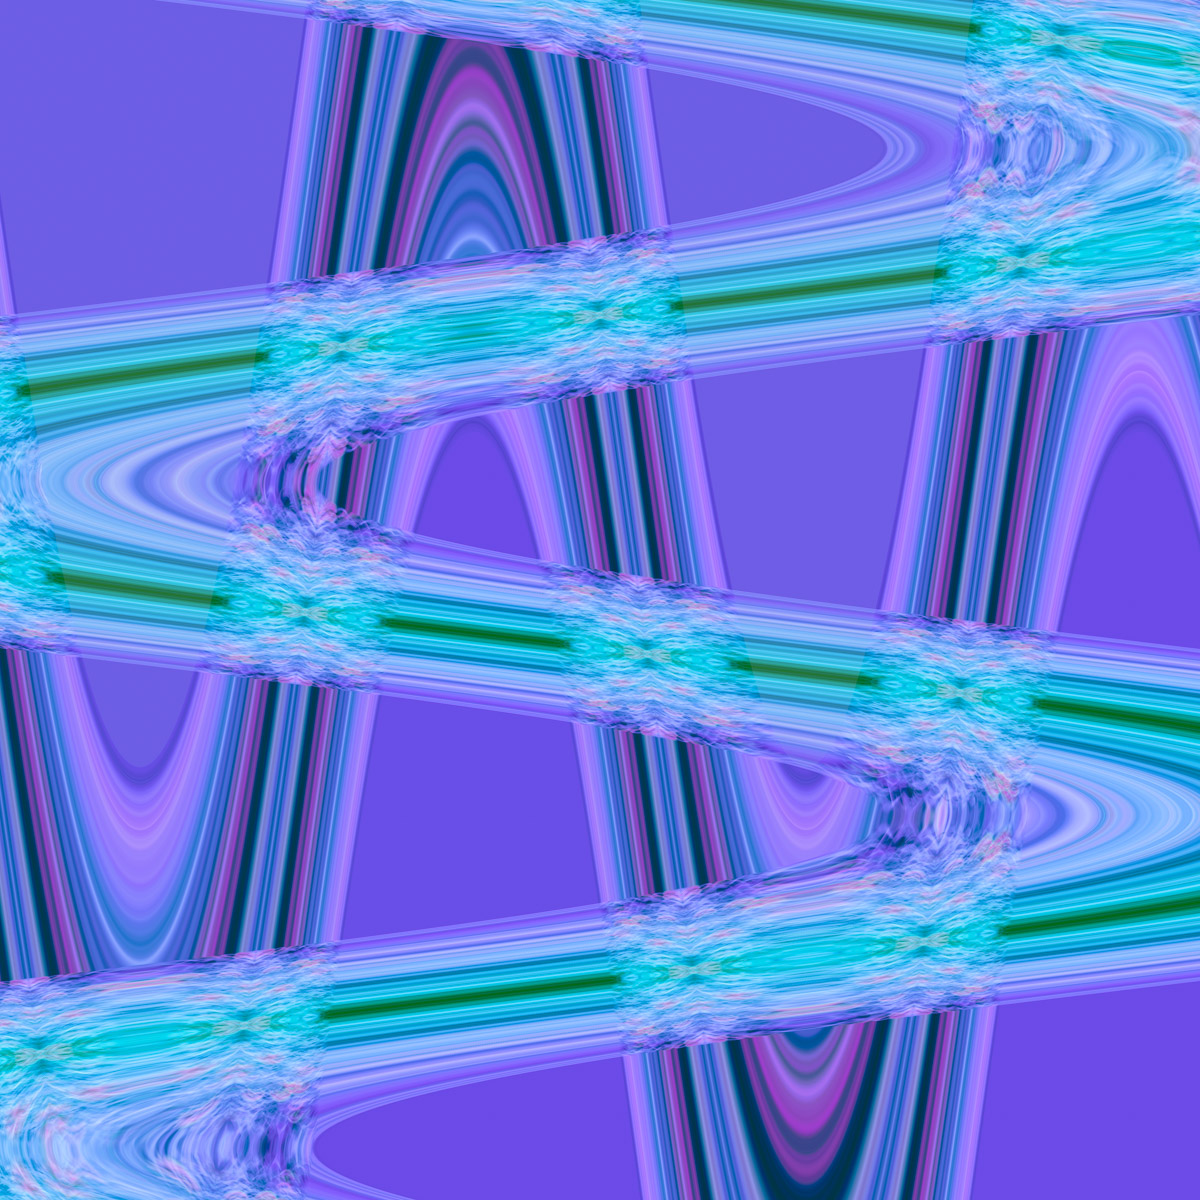 A blue and green abstract background with lines.